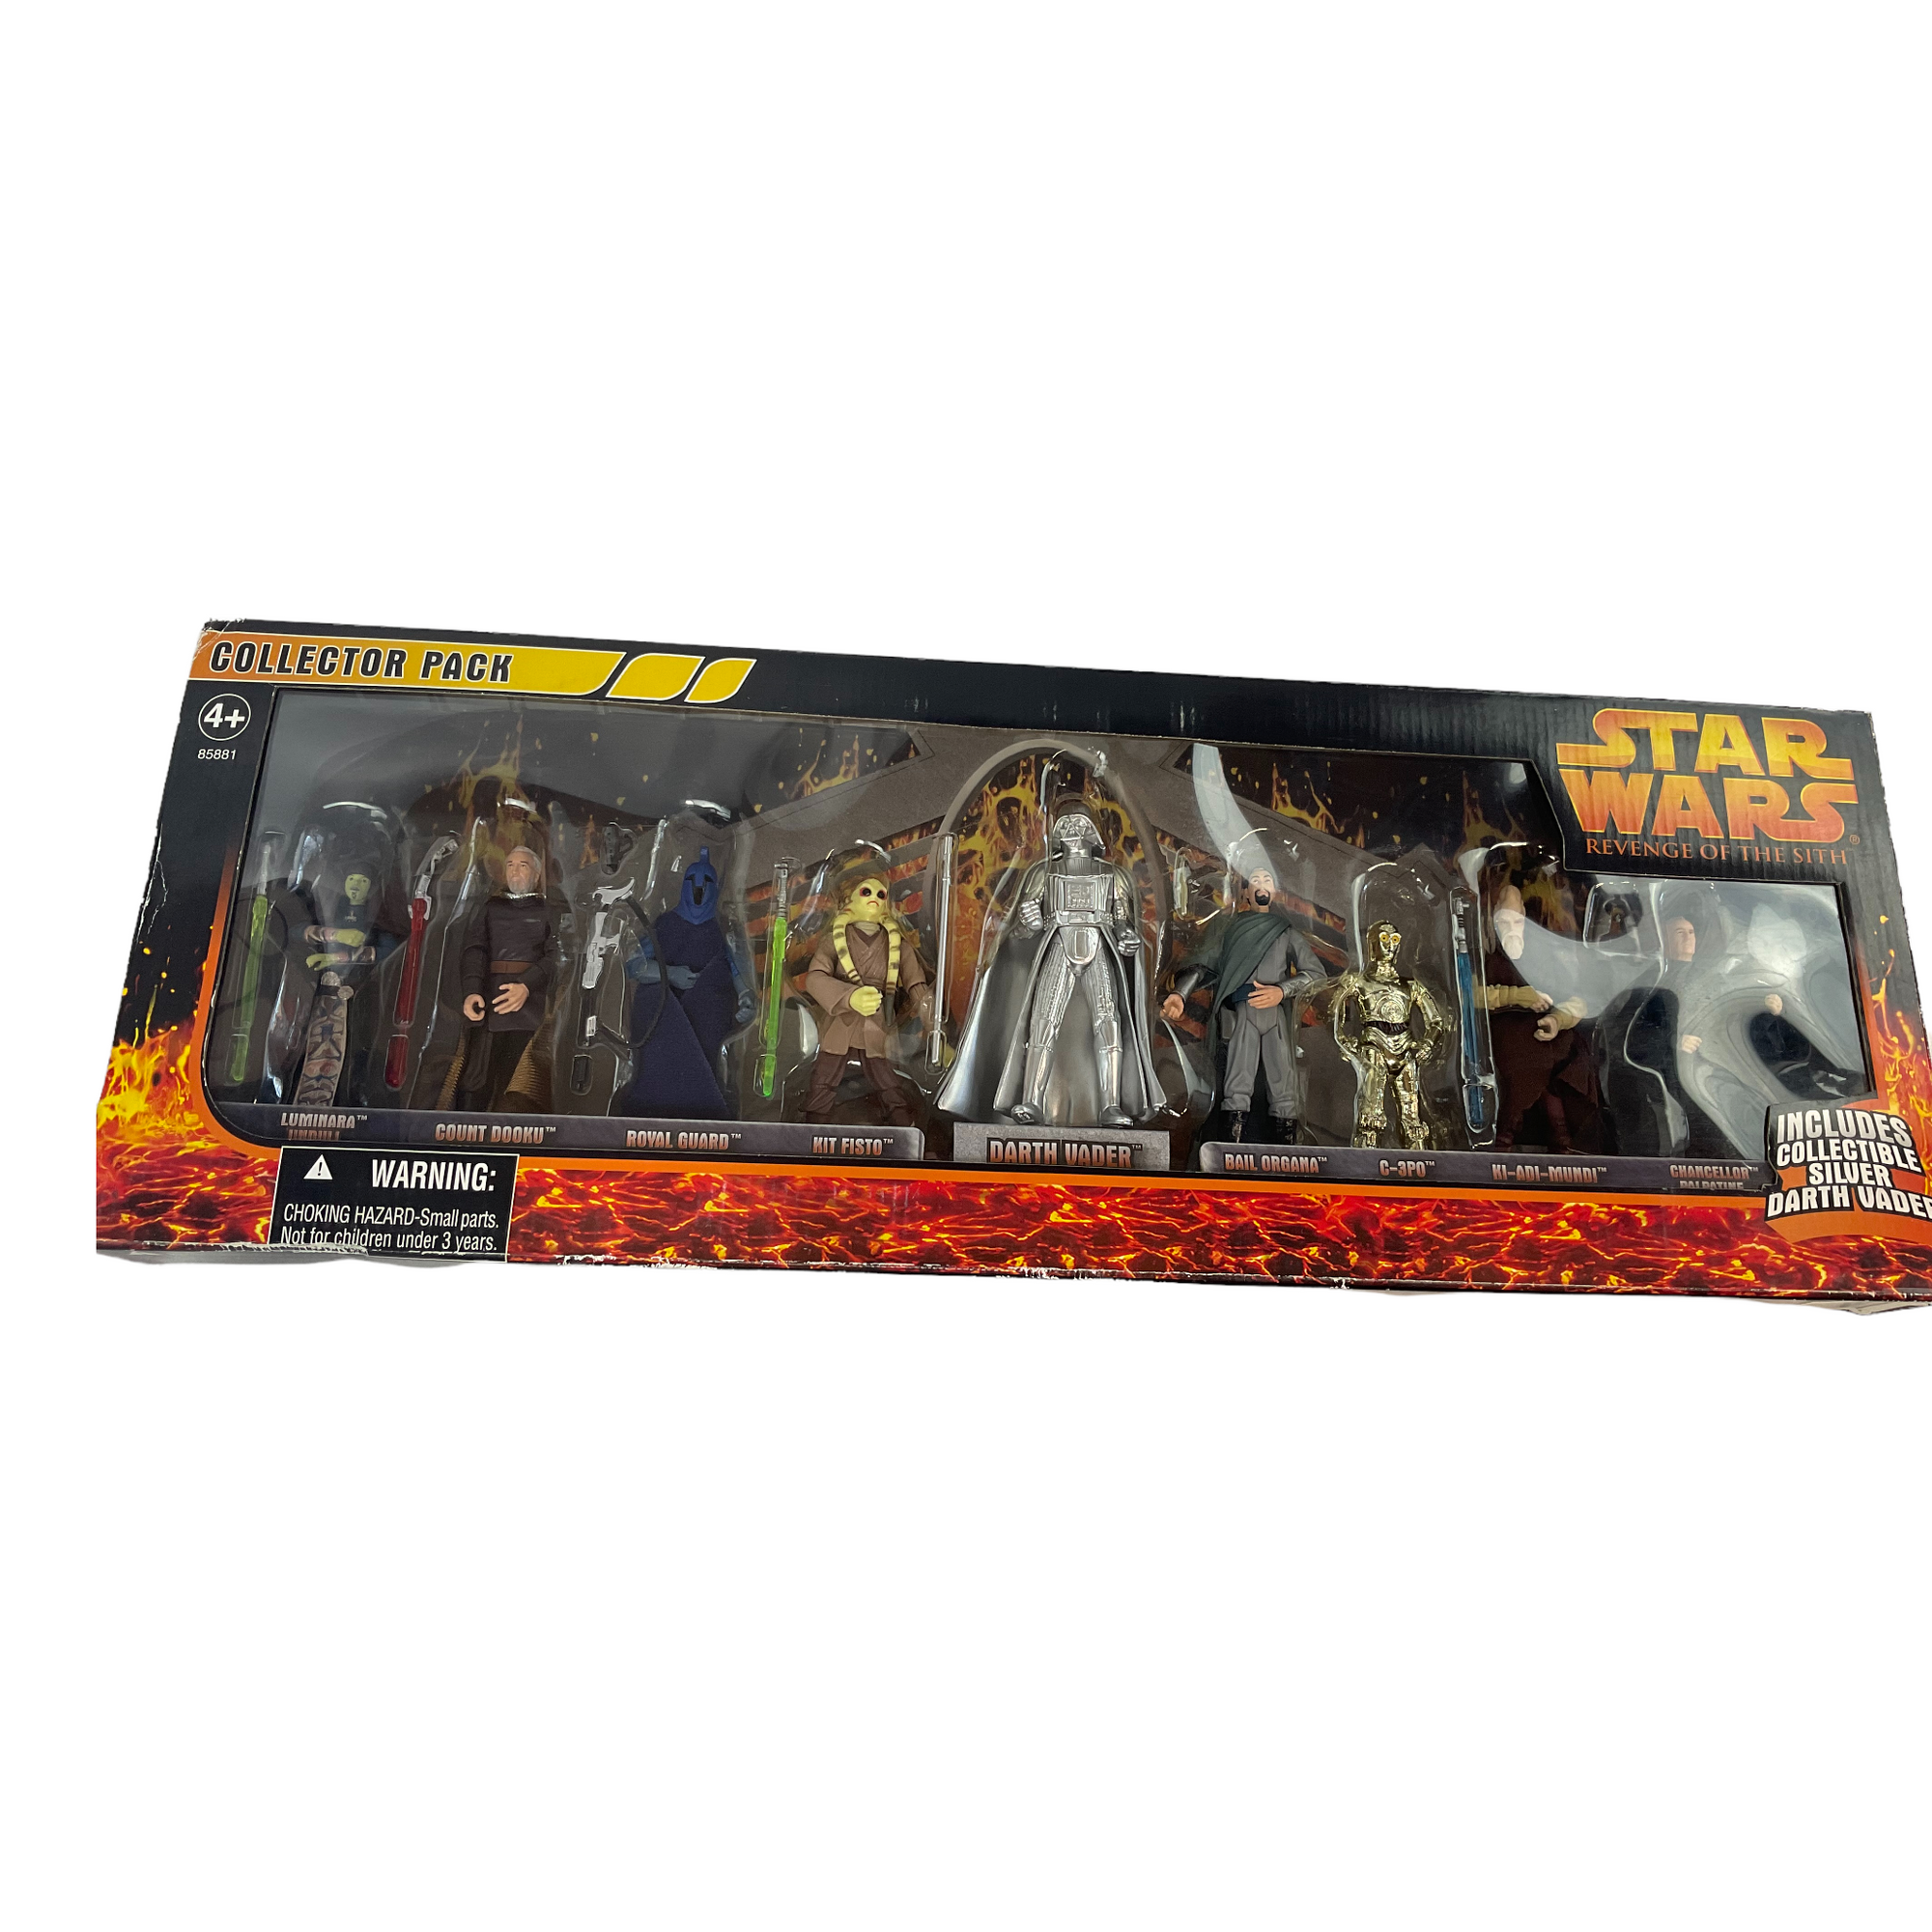 Star Wars Episode III: Collector's 9-Pack of Poseable Figures